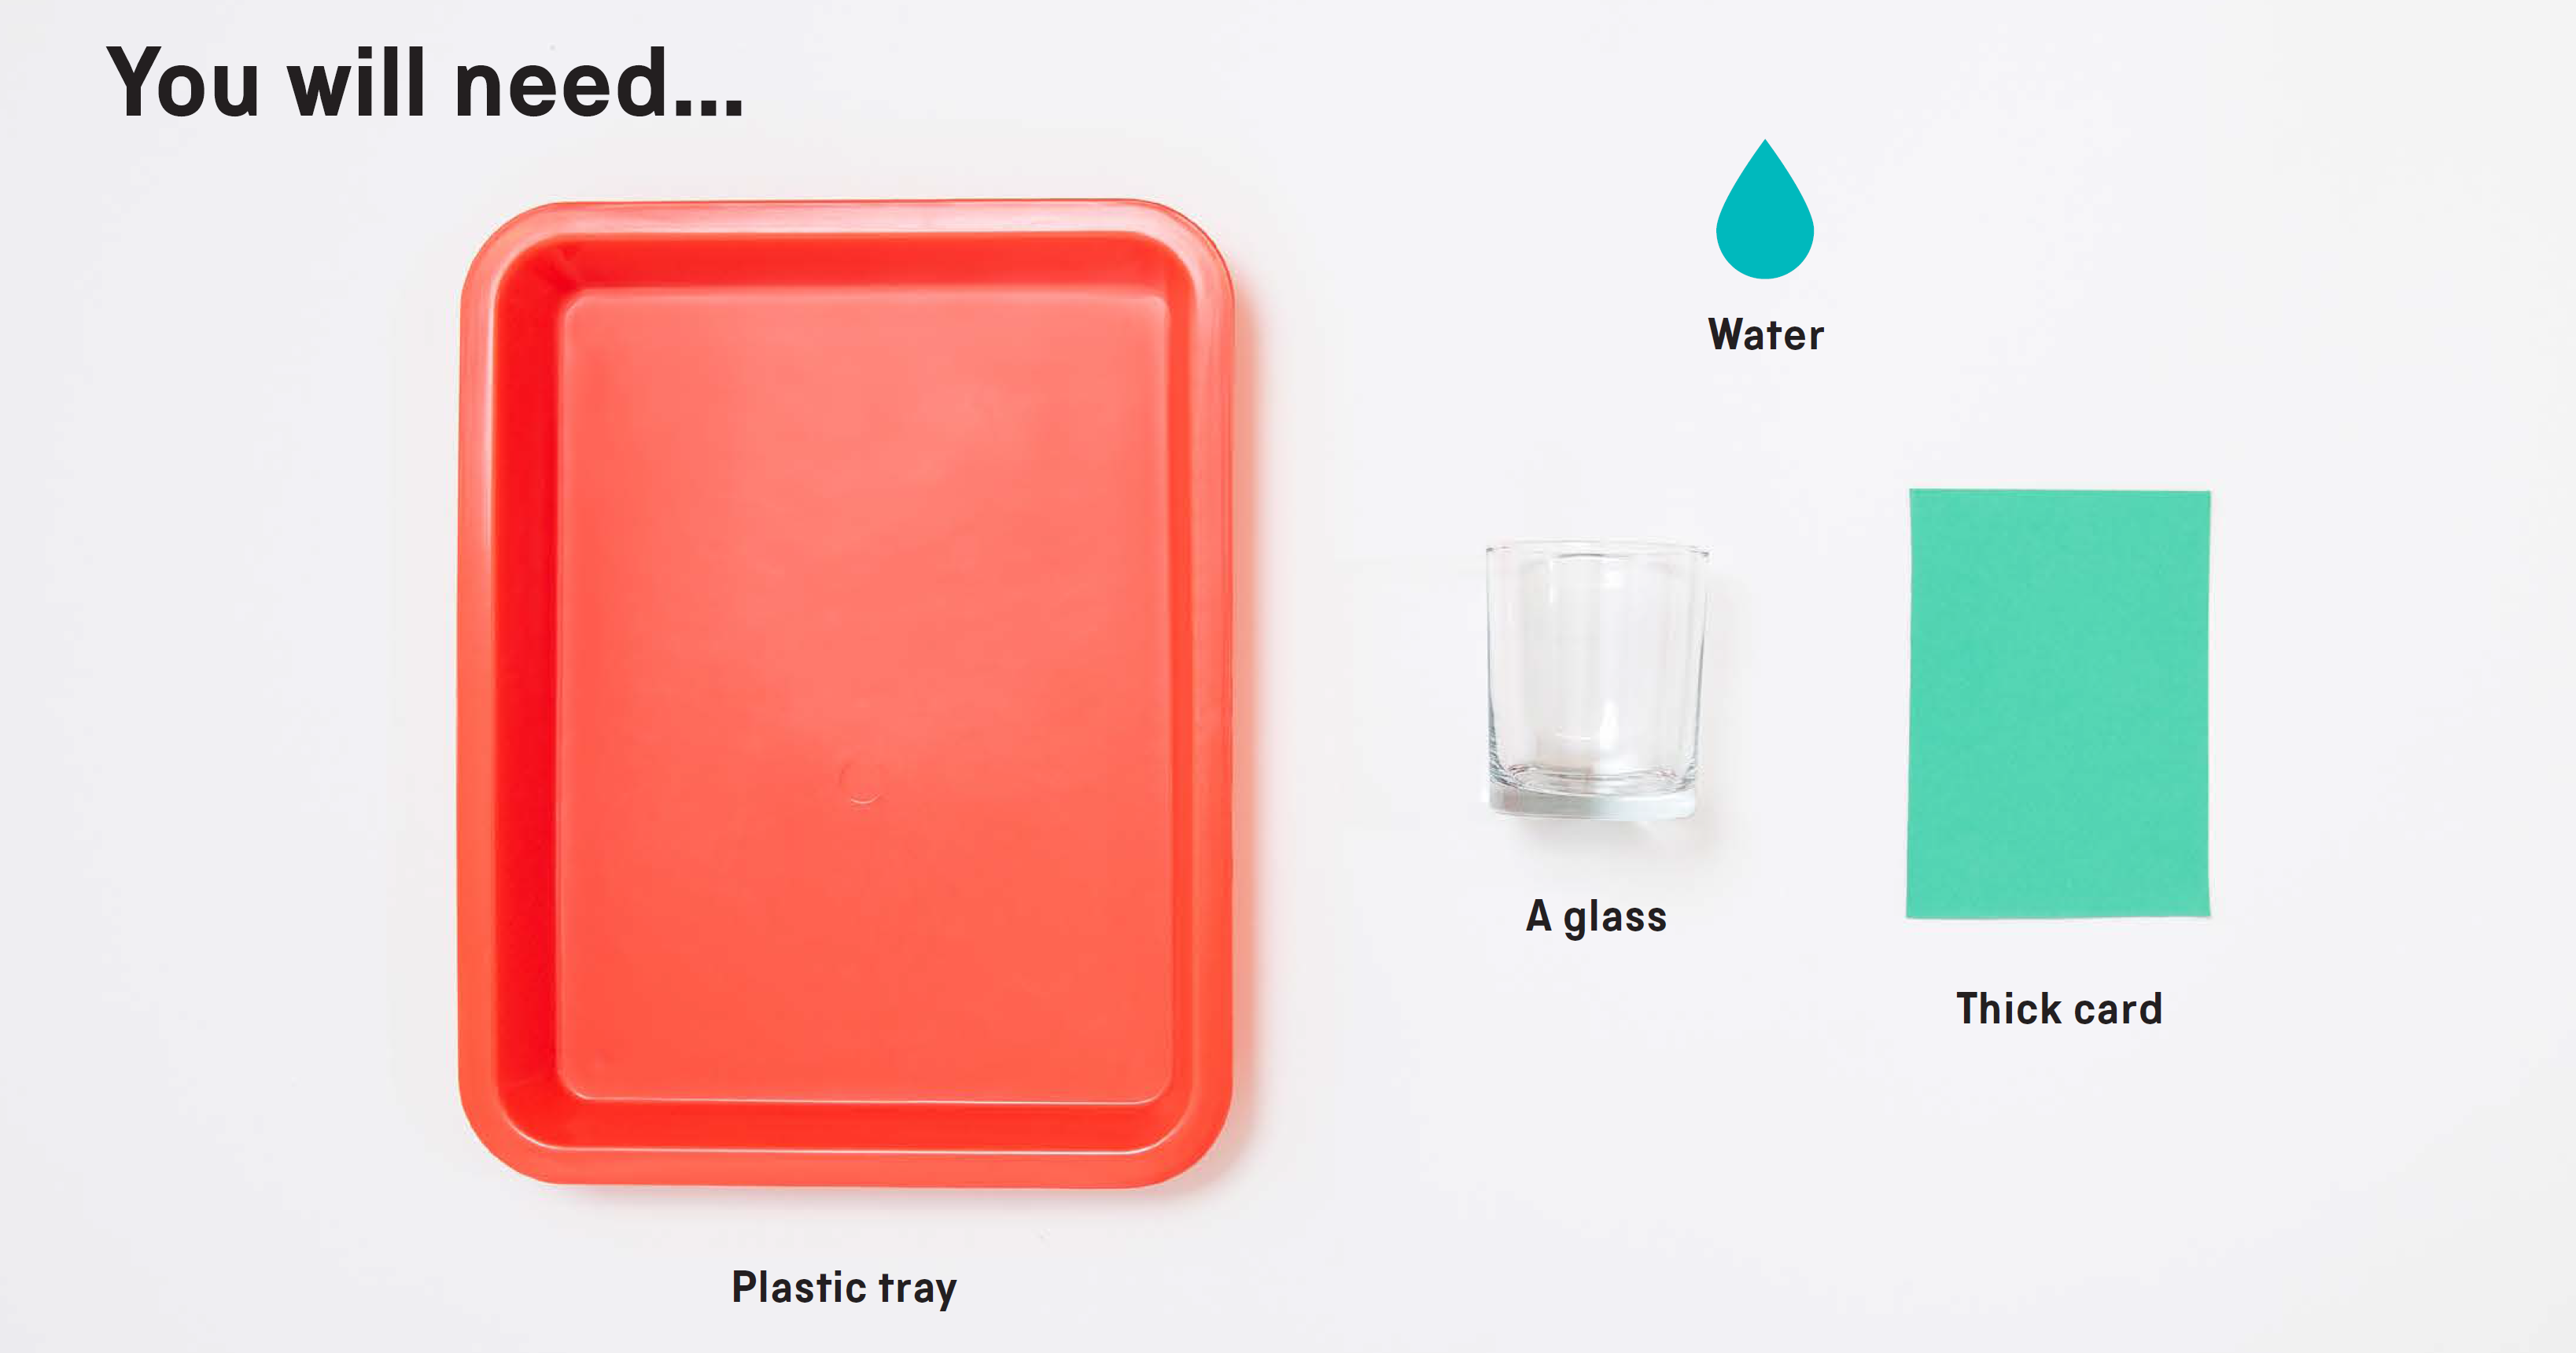 You will need: a plastic tray, water, a glass and a piece of thick card.